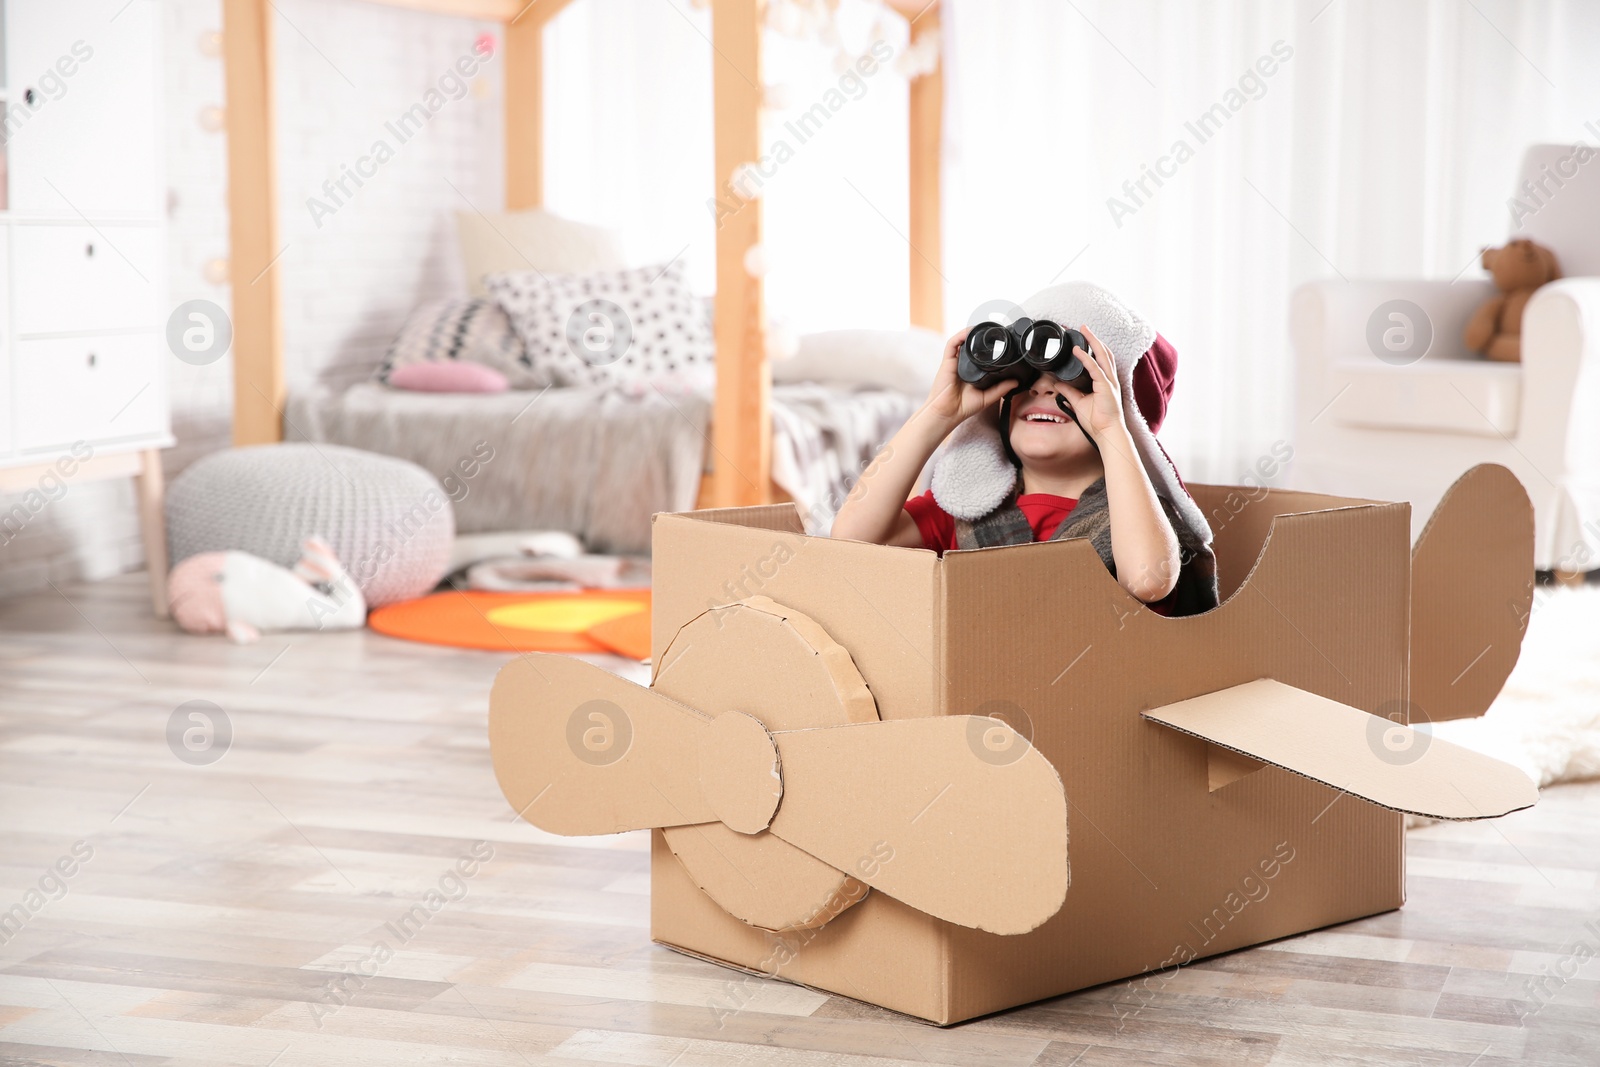 Photo of Cute little boy playing with binoculars and cardboard airplane in bedroom